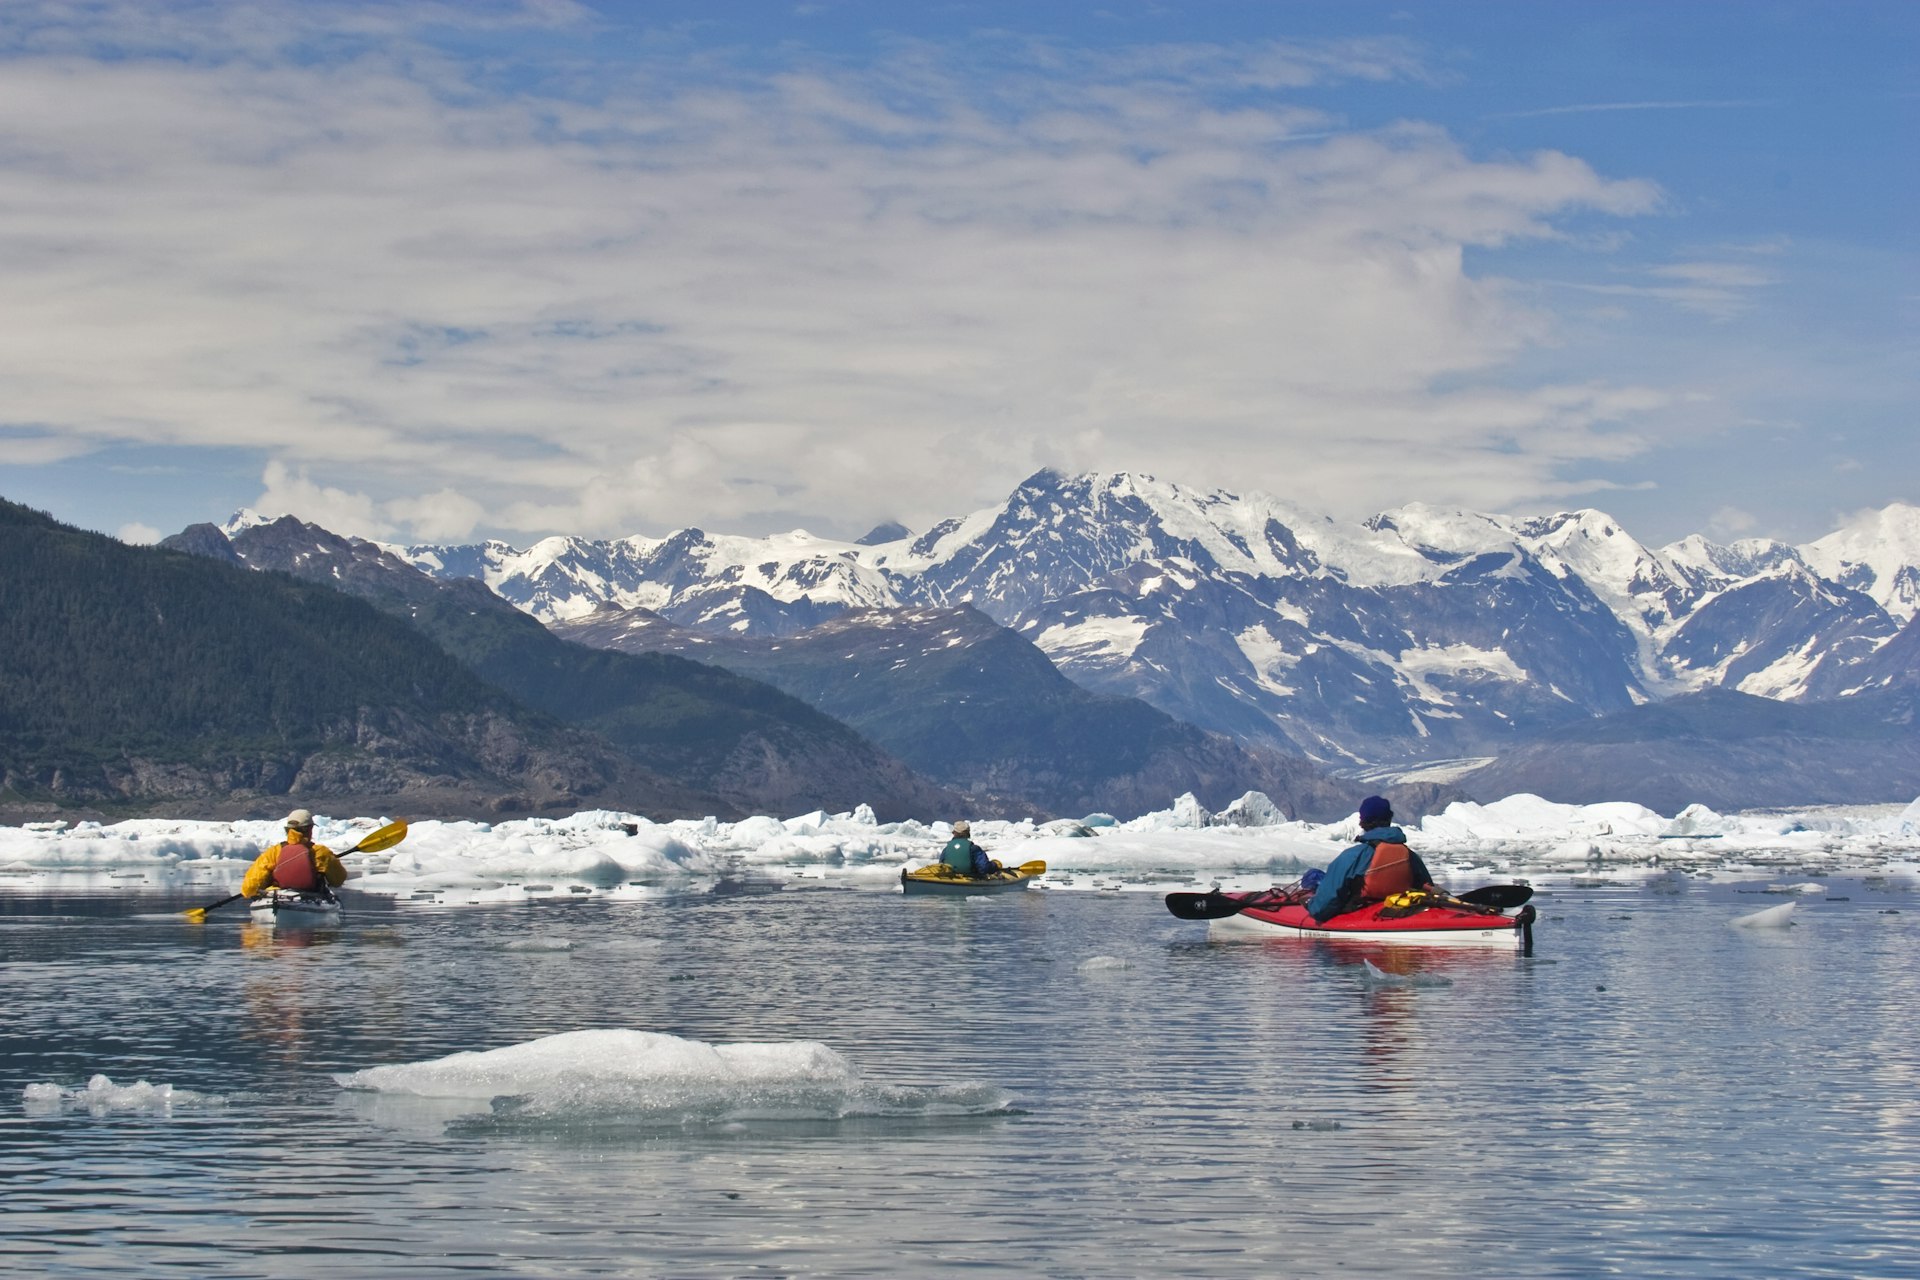 Kayakers in a bay surrounded by icebergs